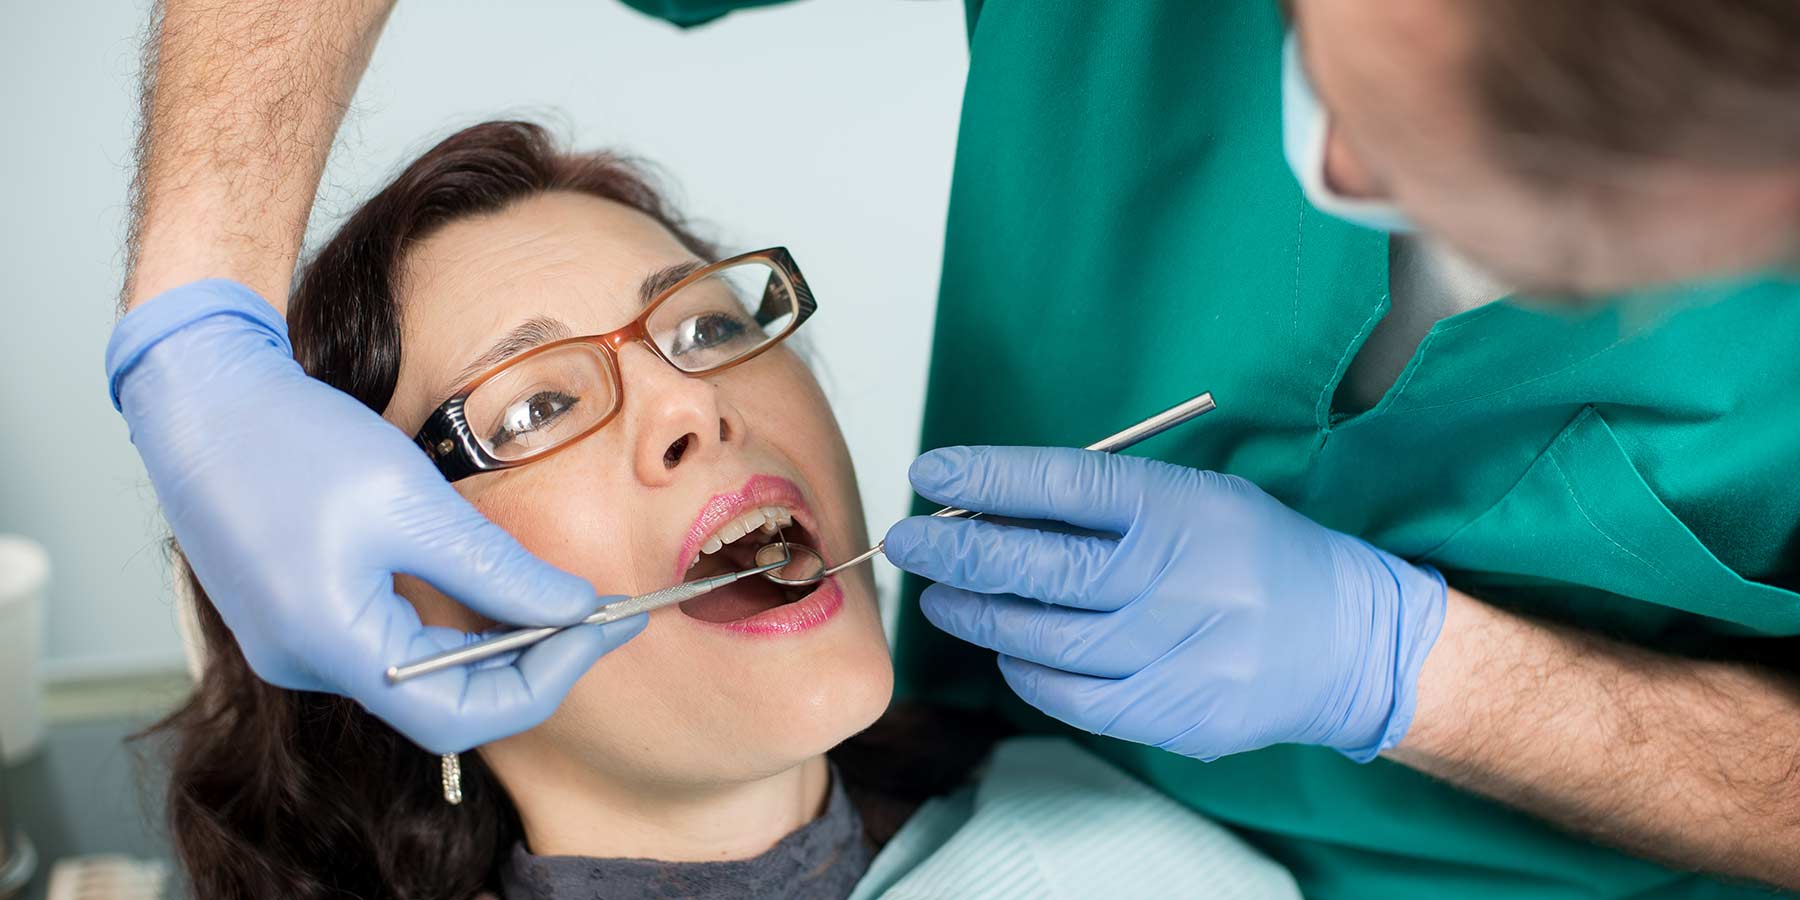 Emergency Dental Services in Madison